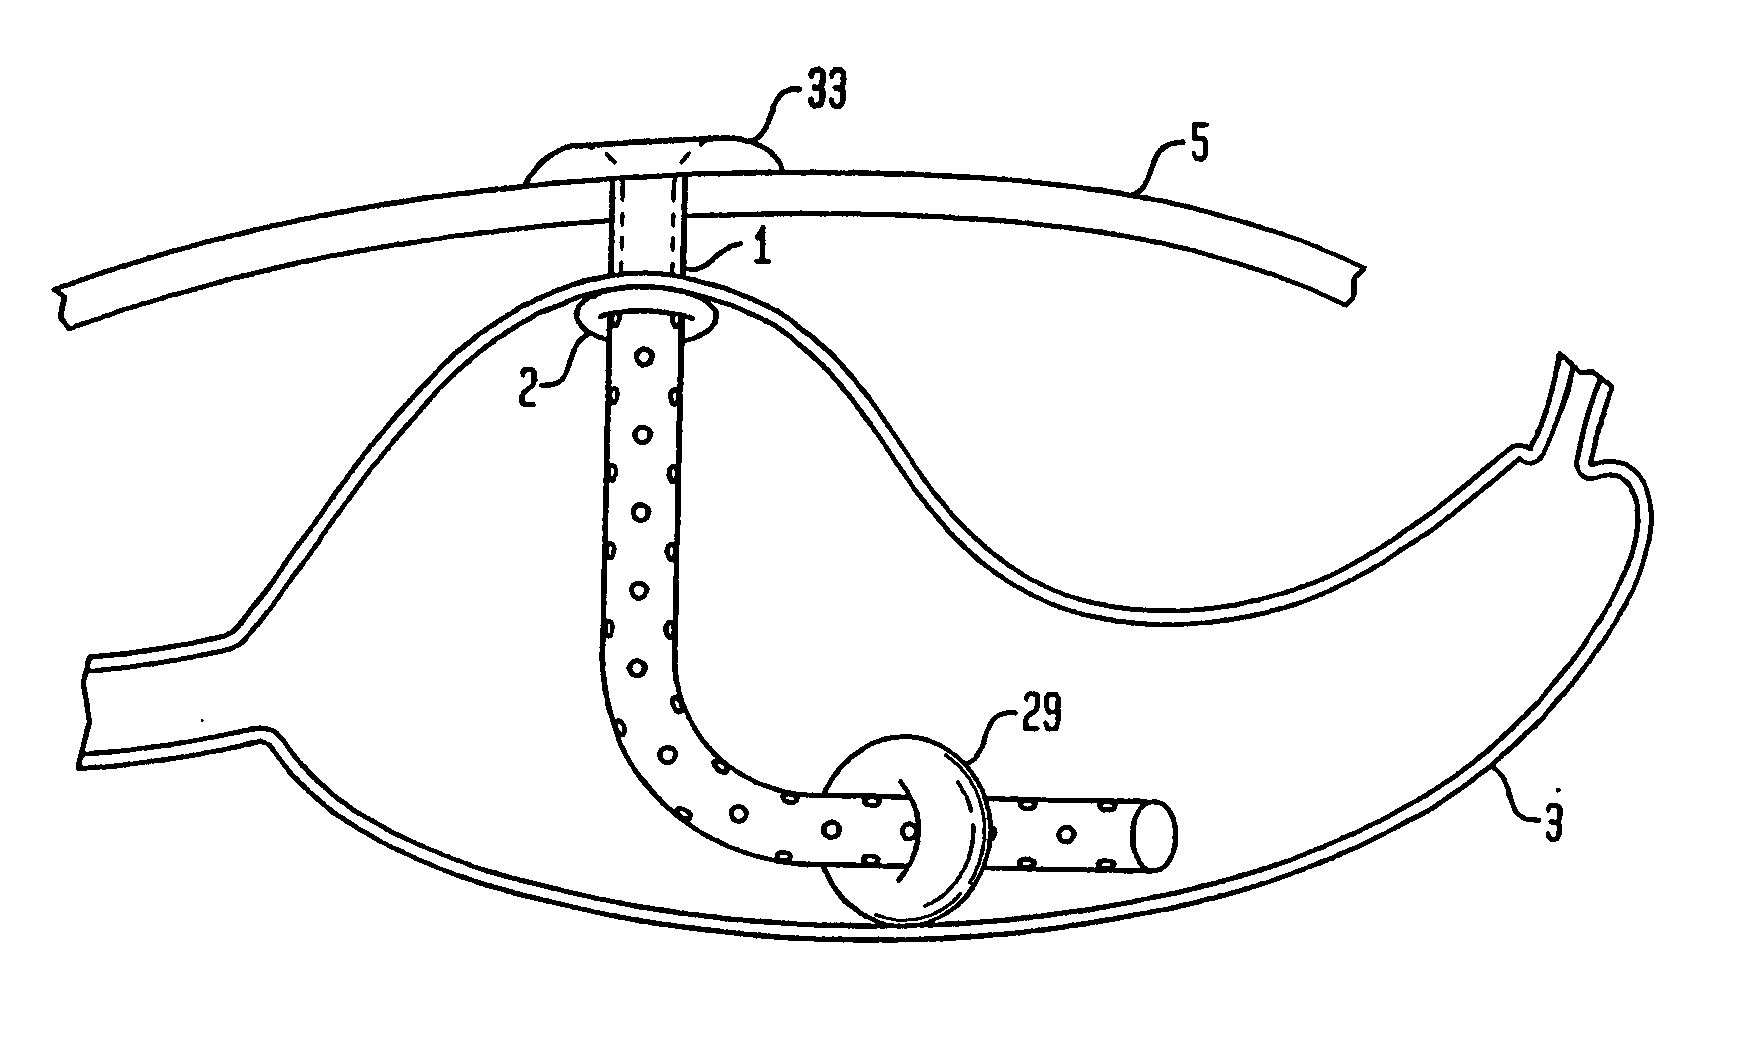 Apparatus for treating obesity by extracting food